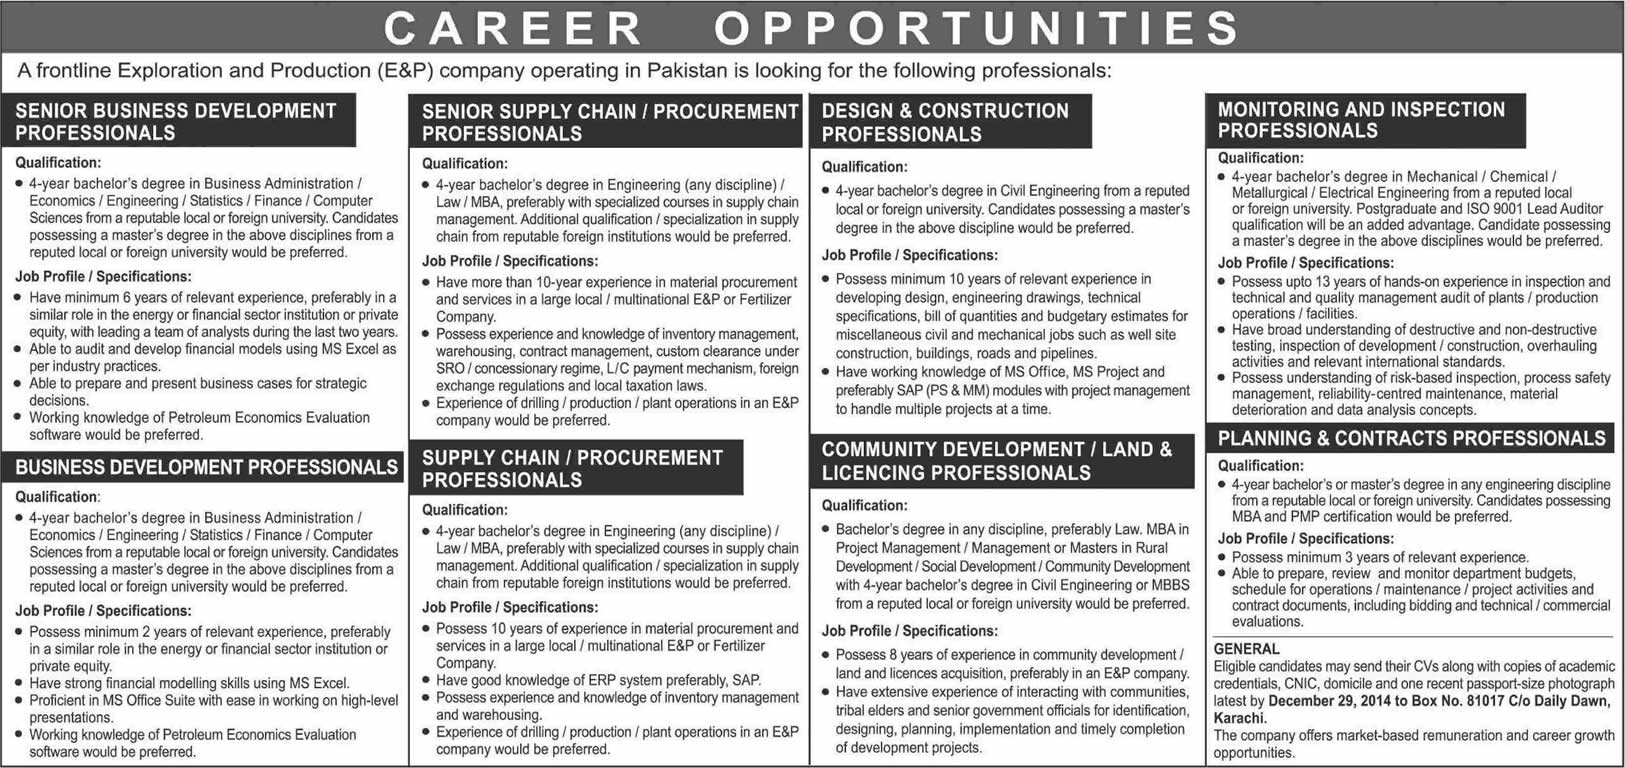 Oil and Gas Jobs in Pakistan 2014 December in Exploration & Production Company